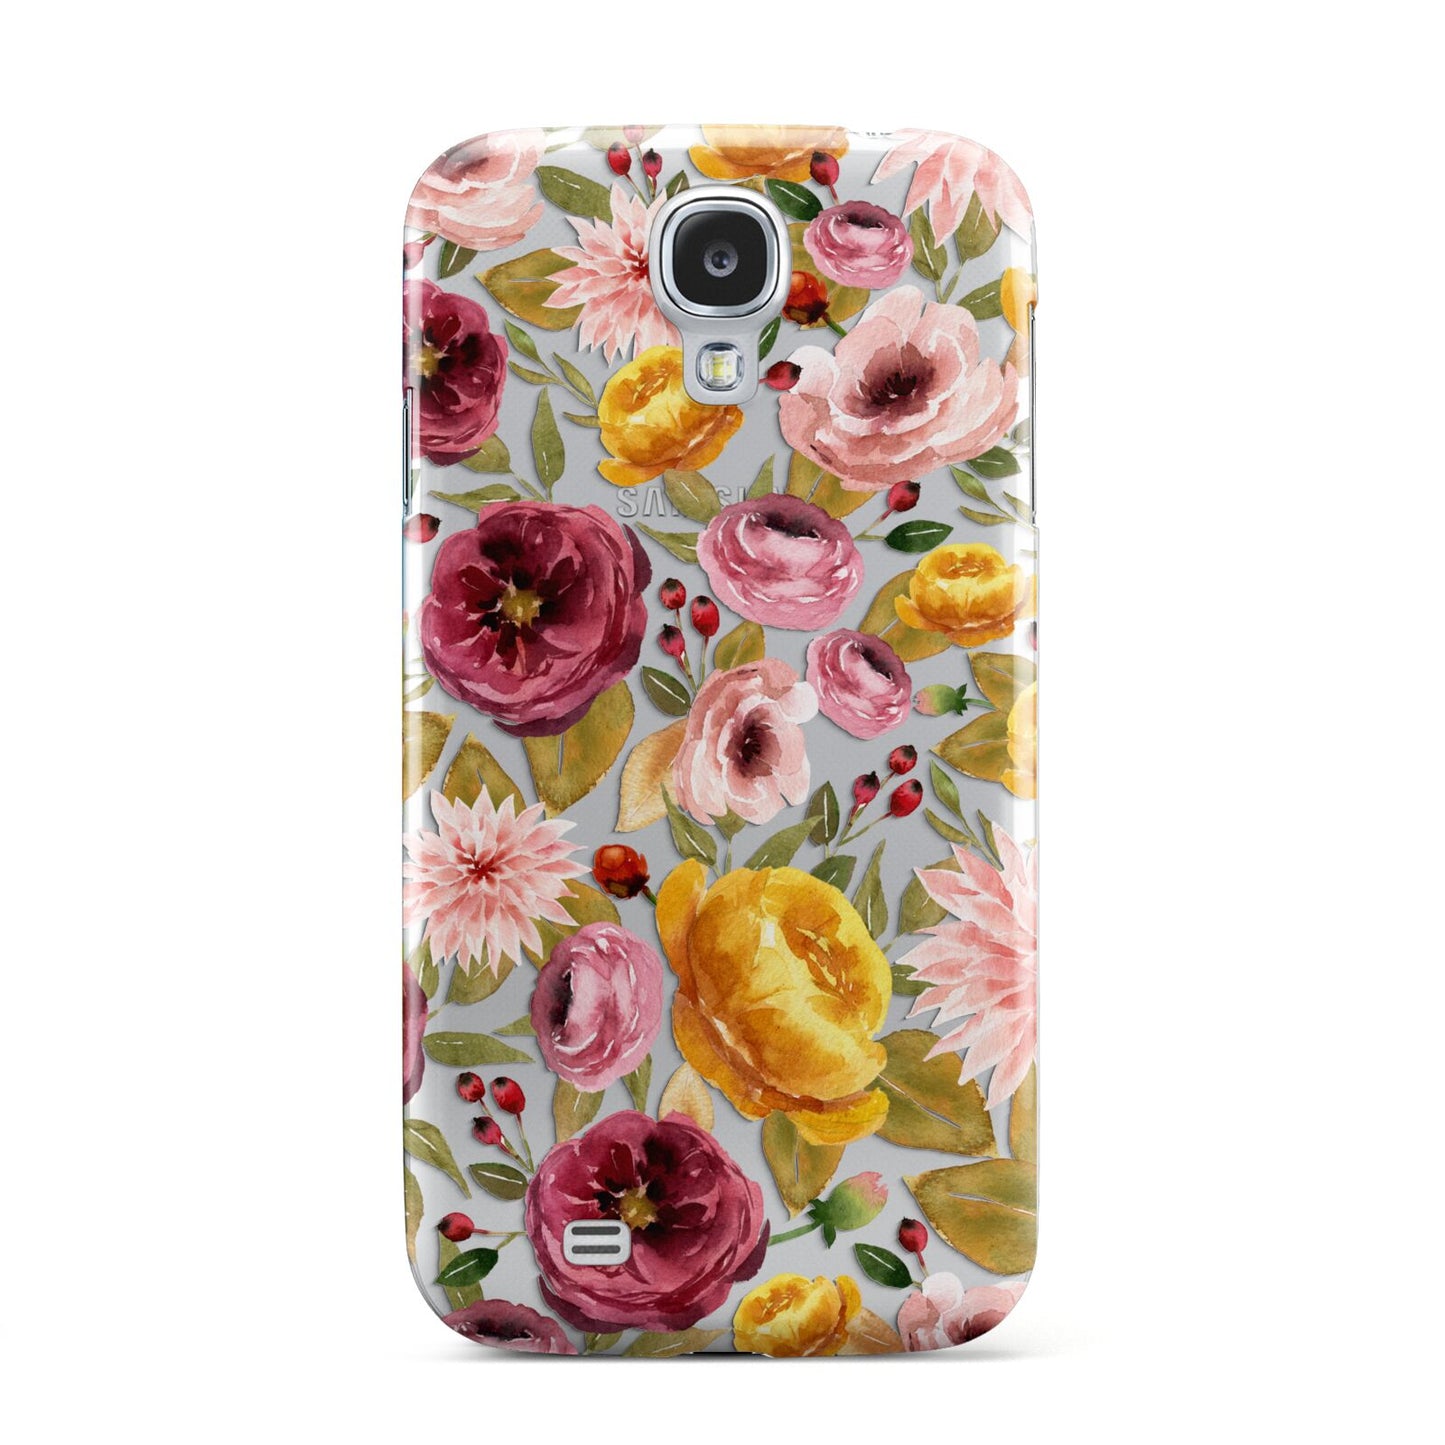 Pink and Mustard Floral Samsung Galaxy S4 Case